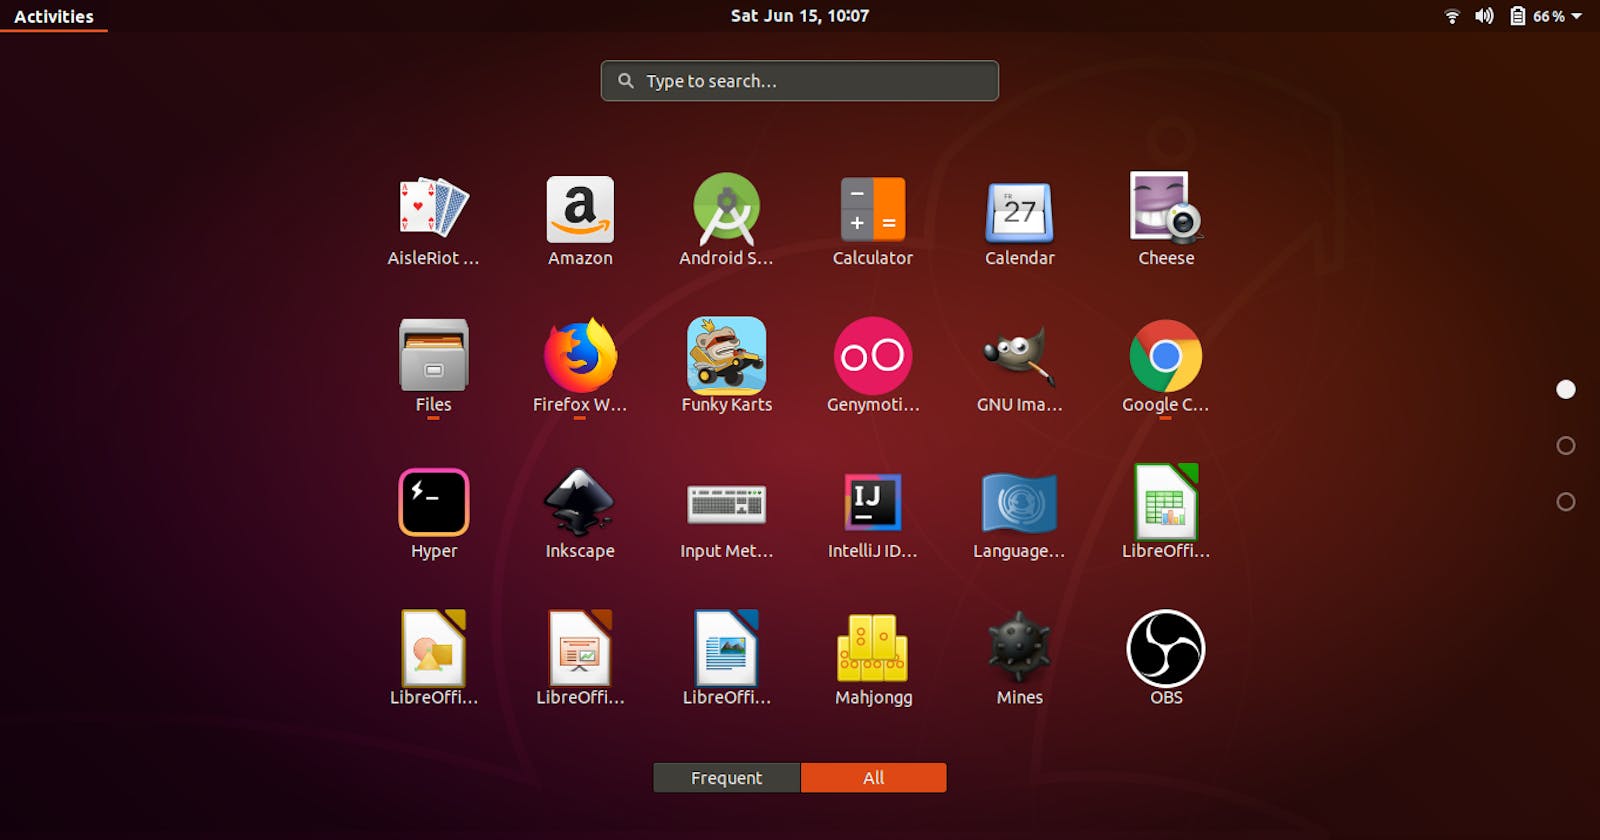 Here's how to Install AppImage on Linux